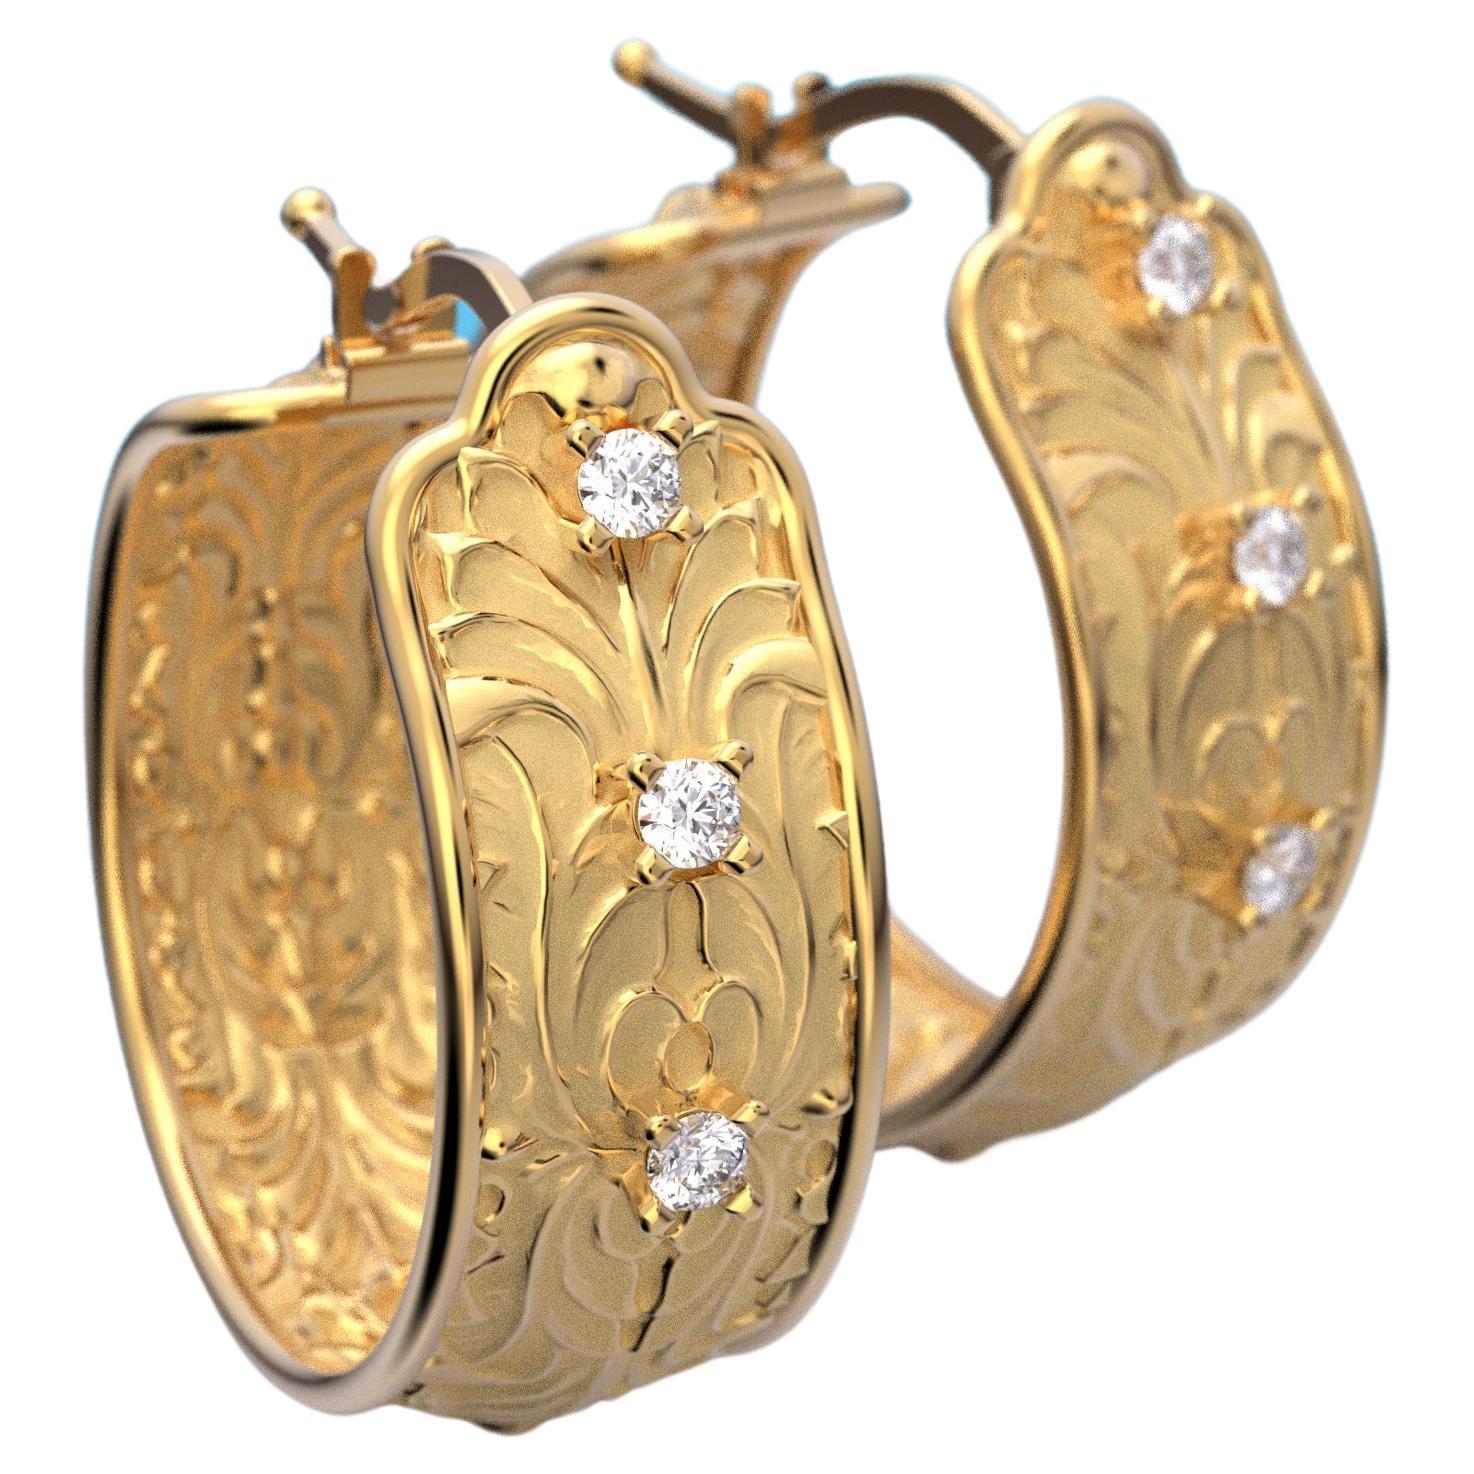 14k Gold Hoop Earrings Made in Italy by Oltremare Gioielli, Baroque Style